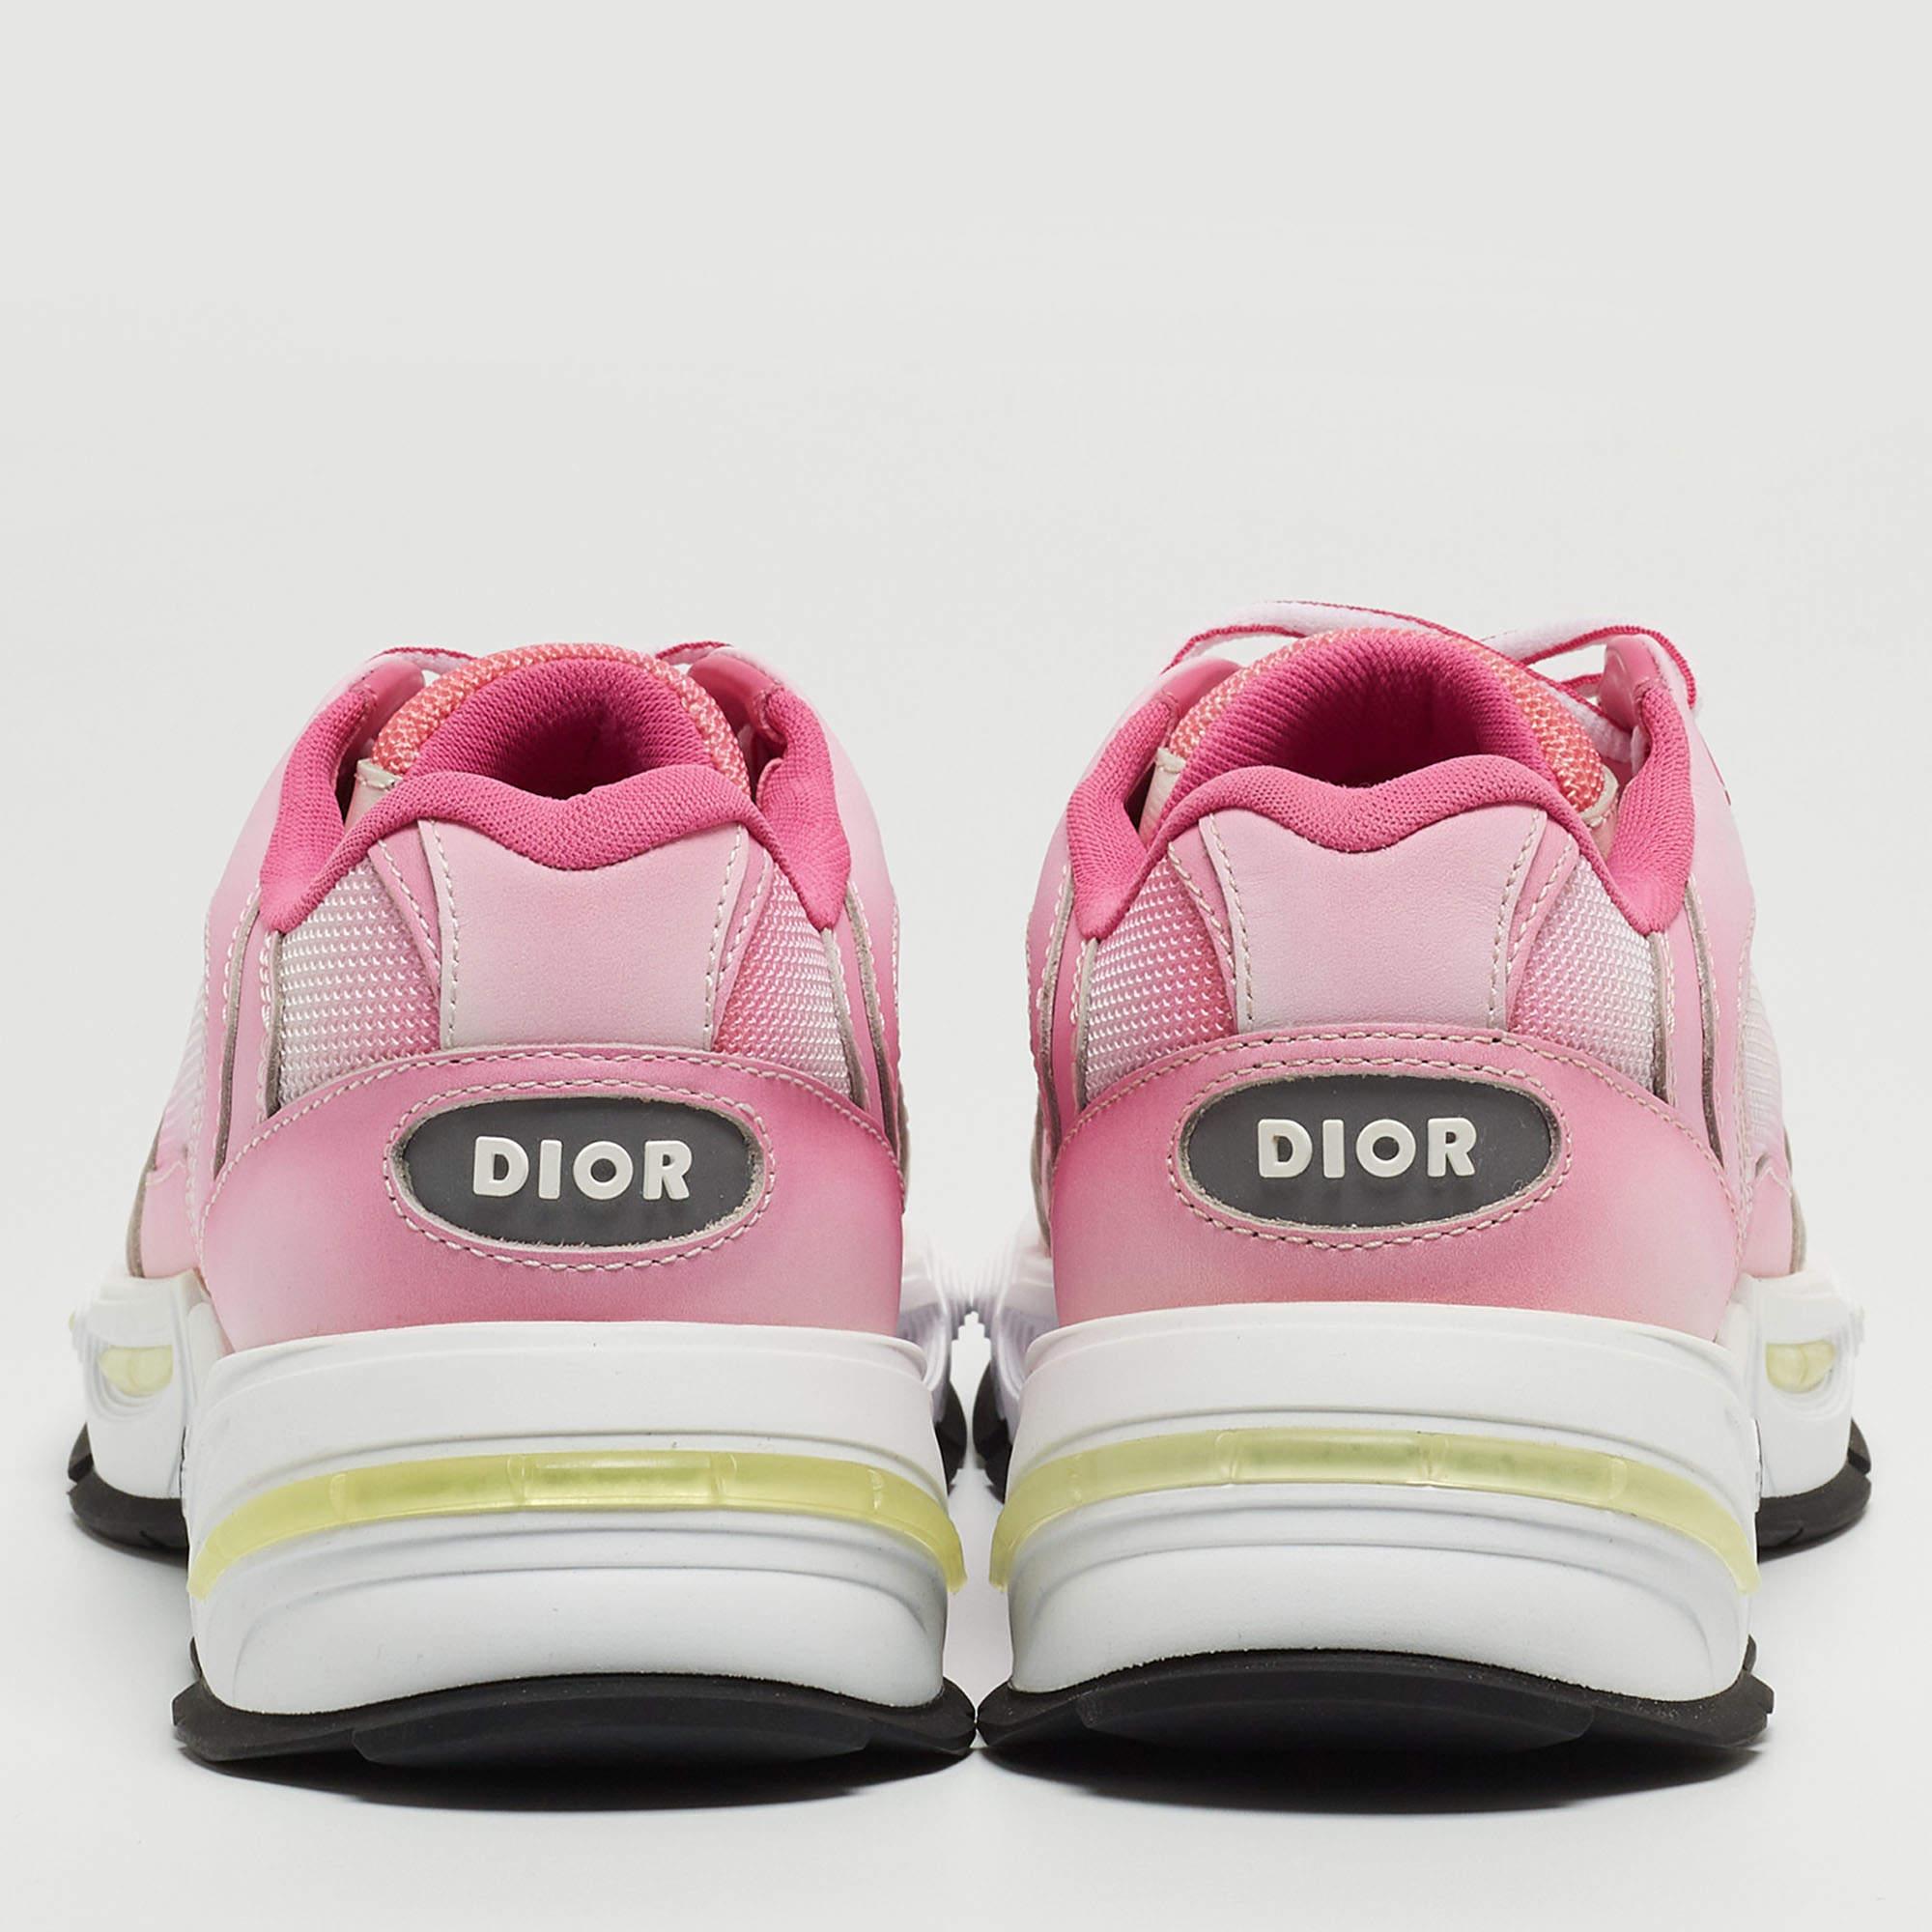 DIOR Pink Mesh and Leather CD1 Gradient Sneakers Size 42 For Sale 3